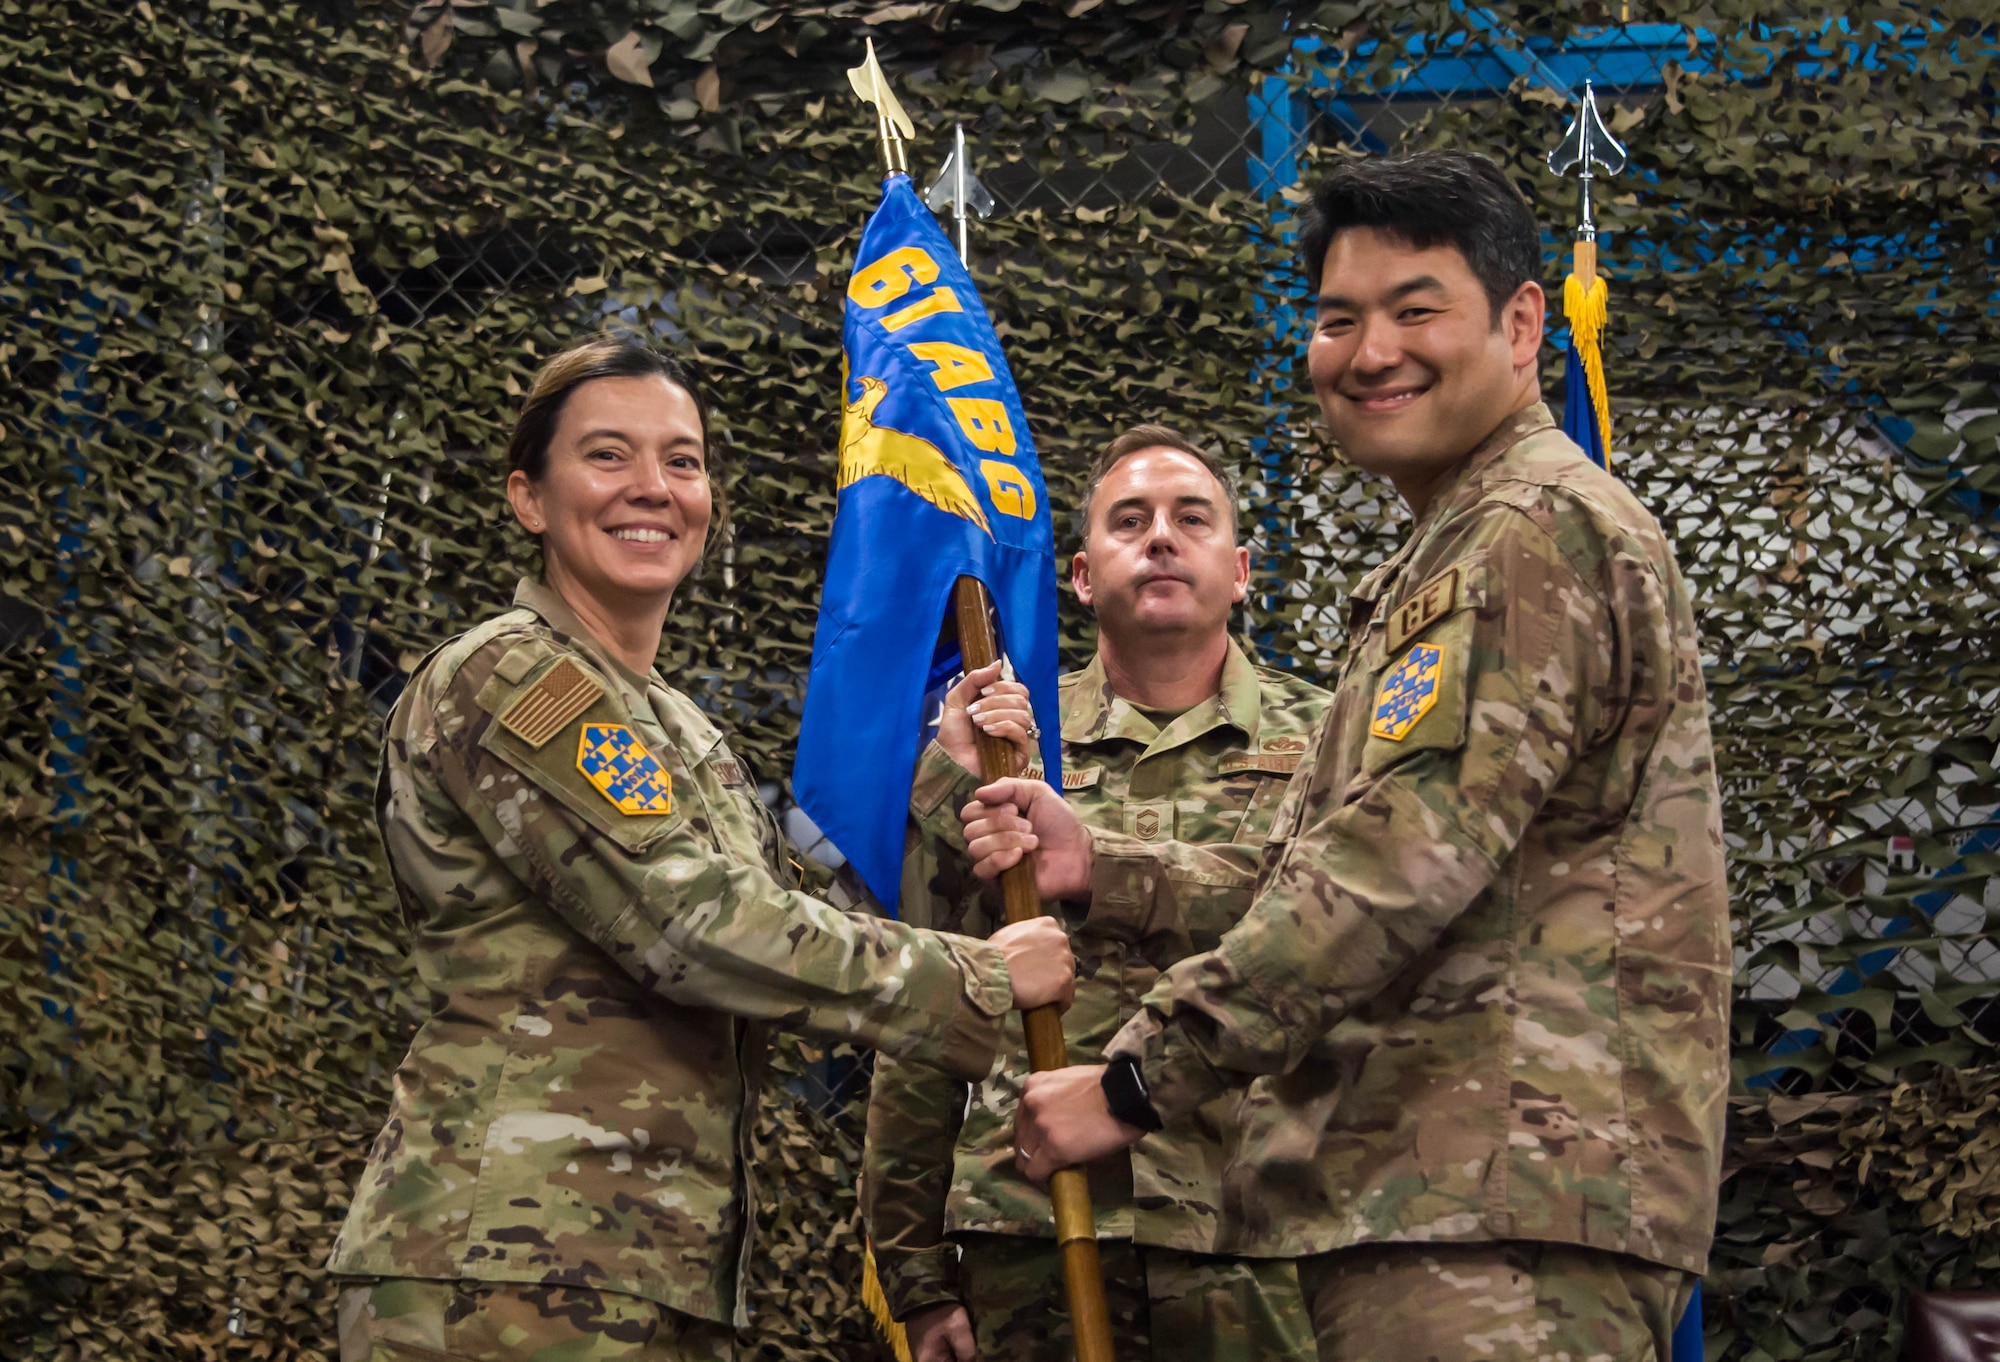 Col. Becky Beers, Los Angeles Garrison commander, left, accepts the 61st CELS, Civilian Engineer and Logistics Squadron, unit gideon from outgoing commander Lt. Col. Woo Chun, right at his change of command ceremony which was held in their warehouse on Monday.